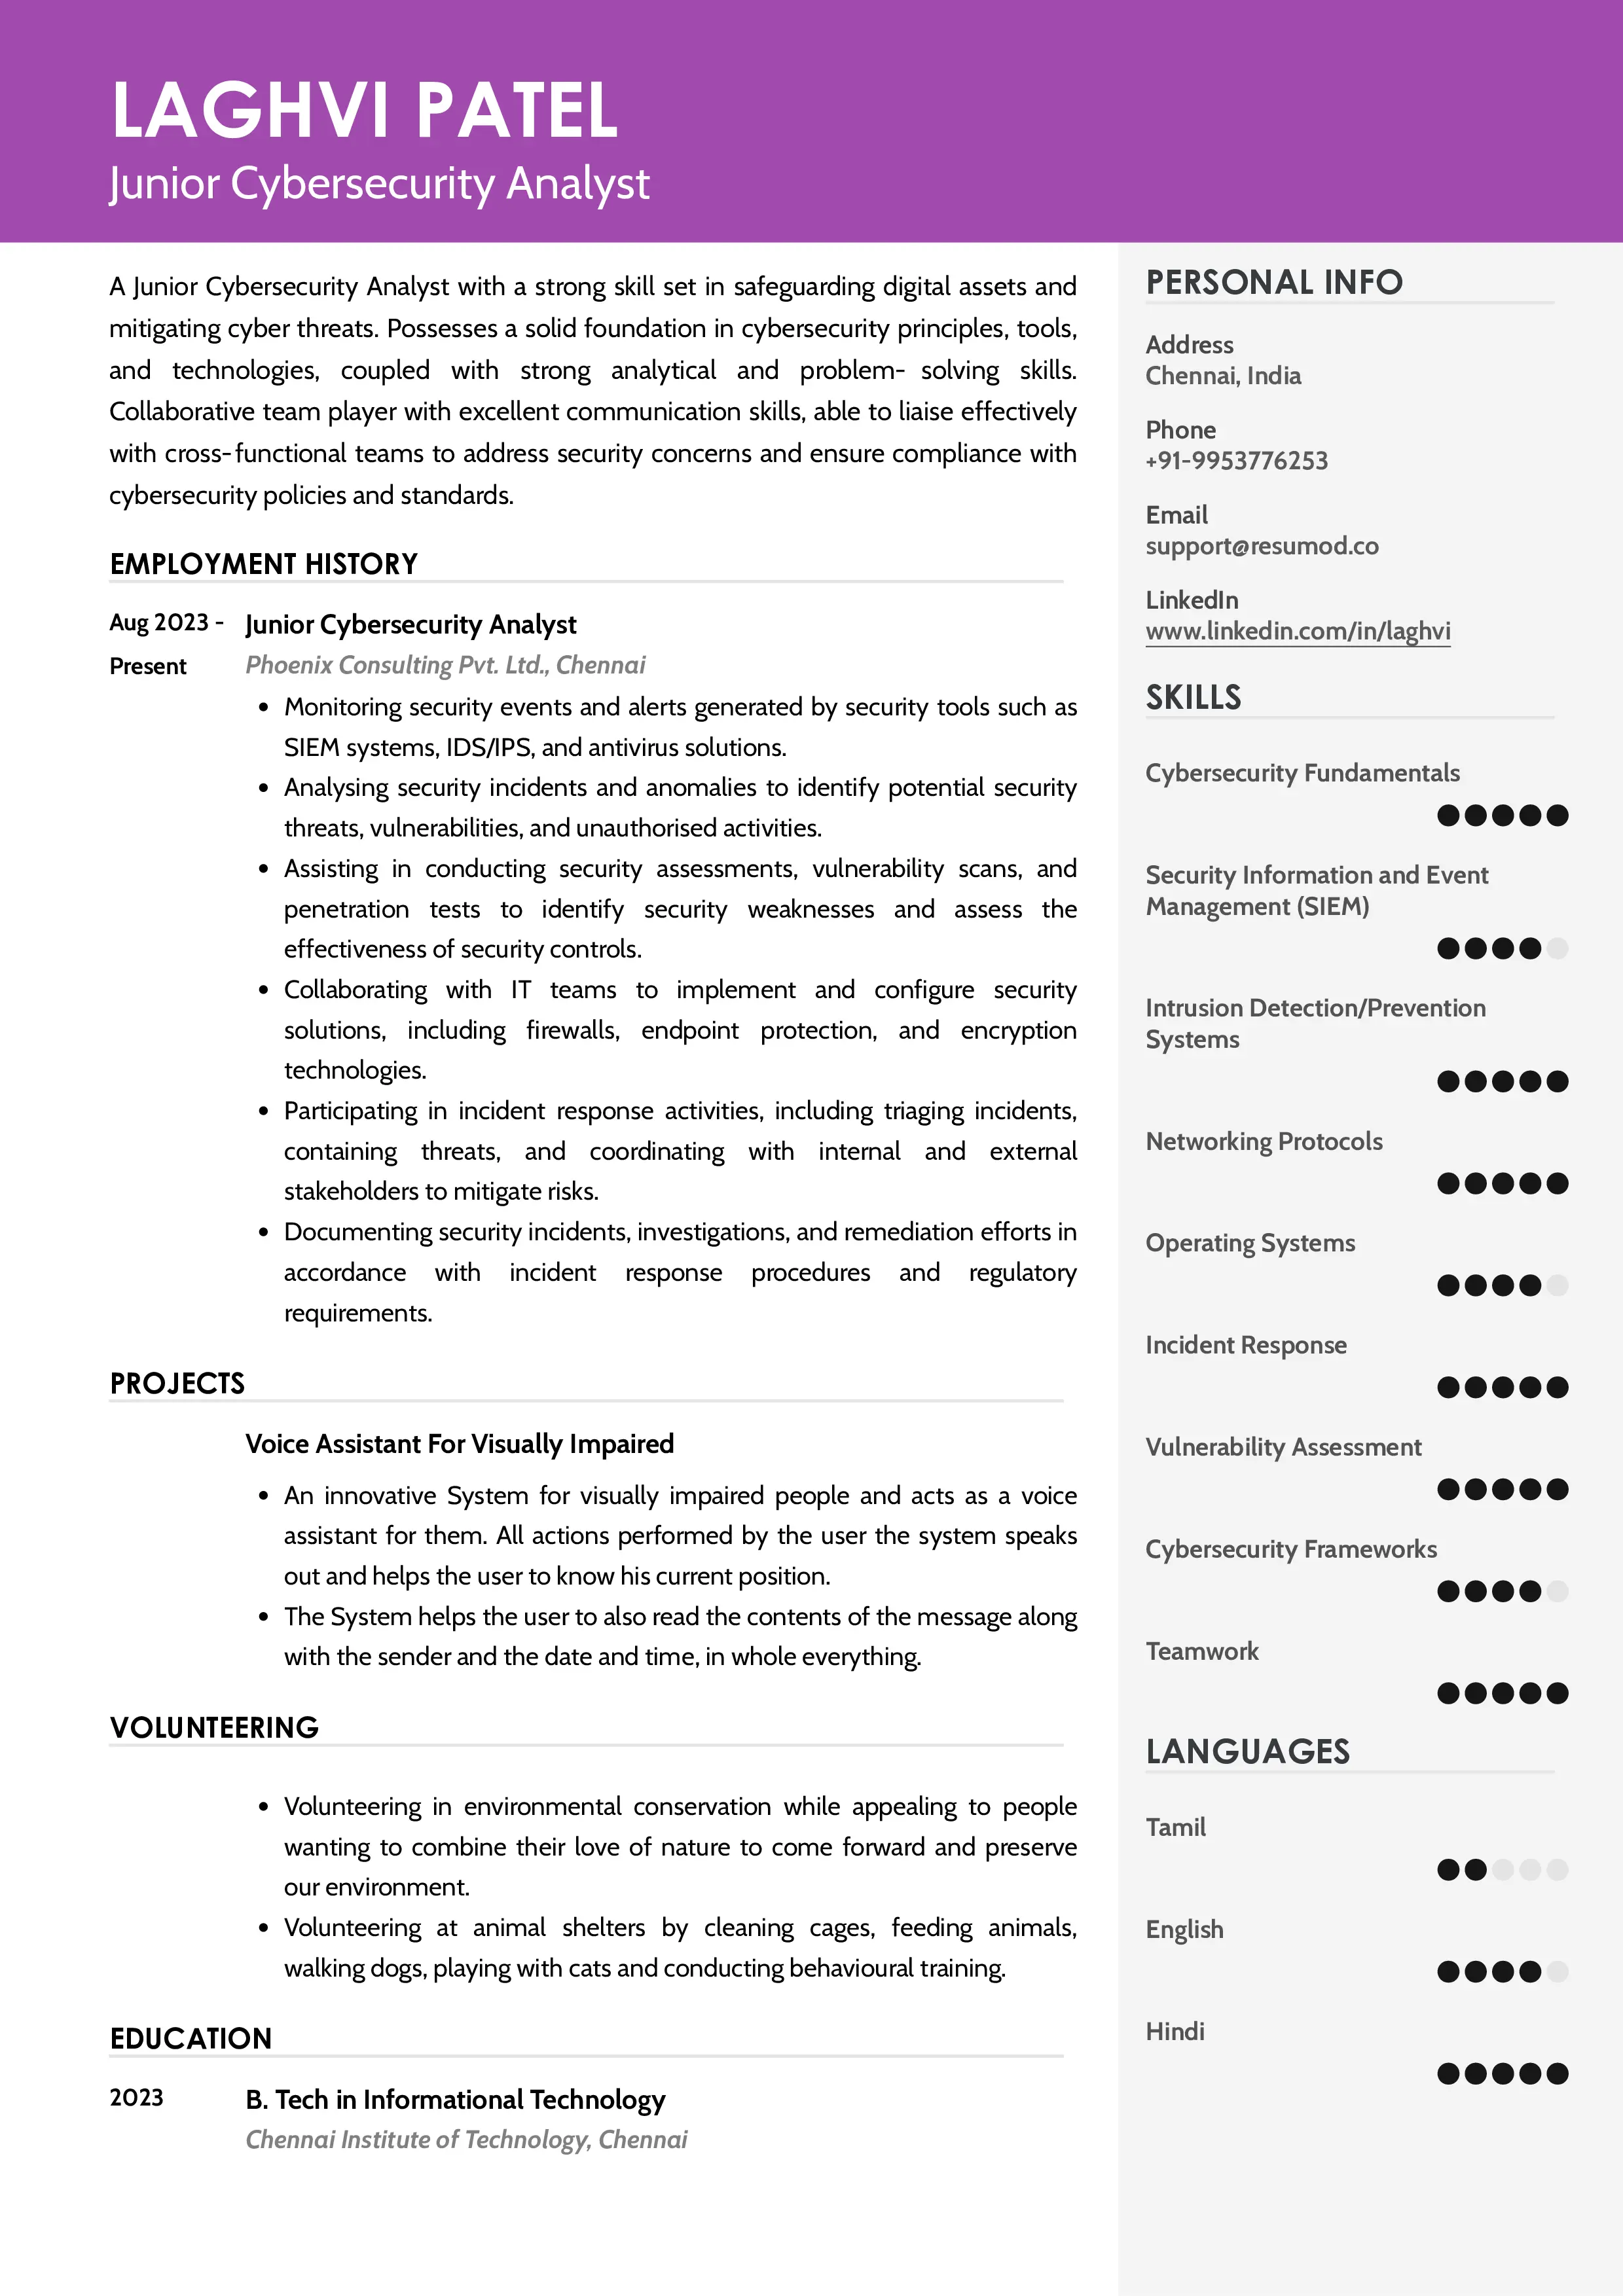 Sample Resume of Junior Cybersecurity Analyst | Free Resume Templates & Samples on Resumod.co